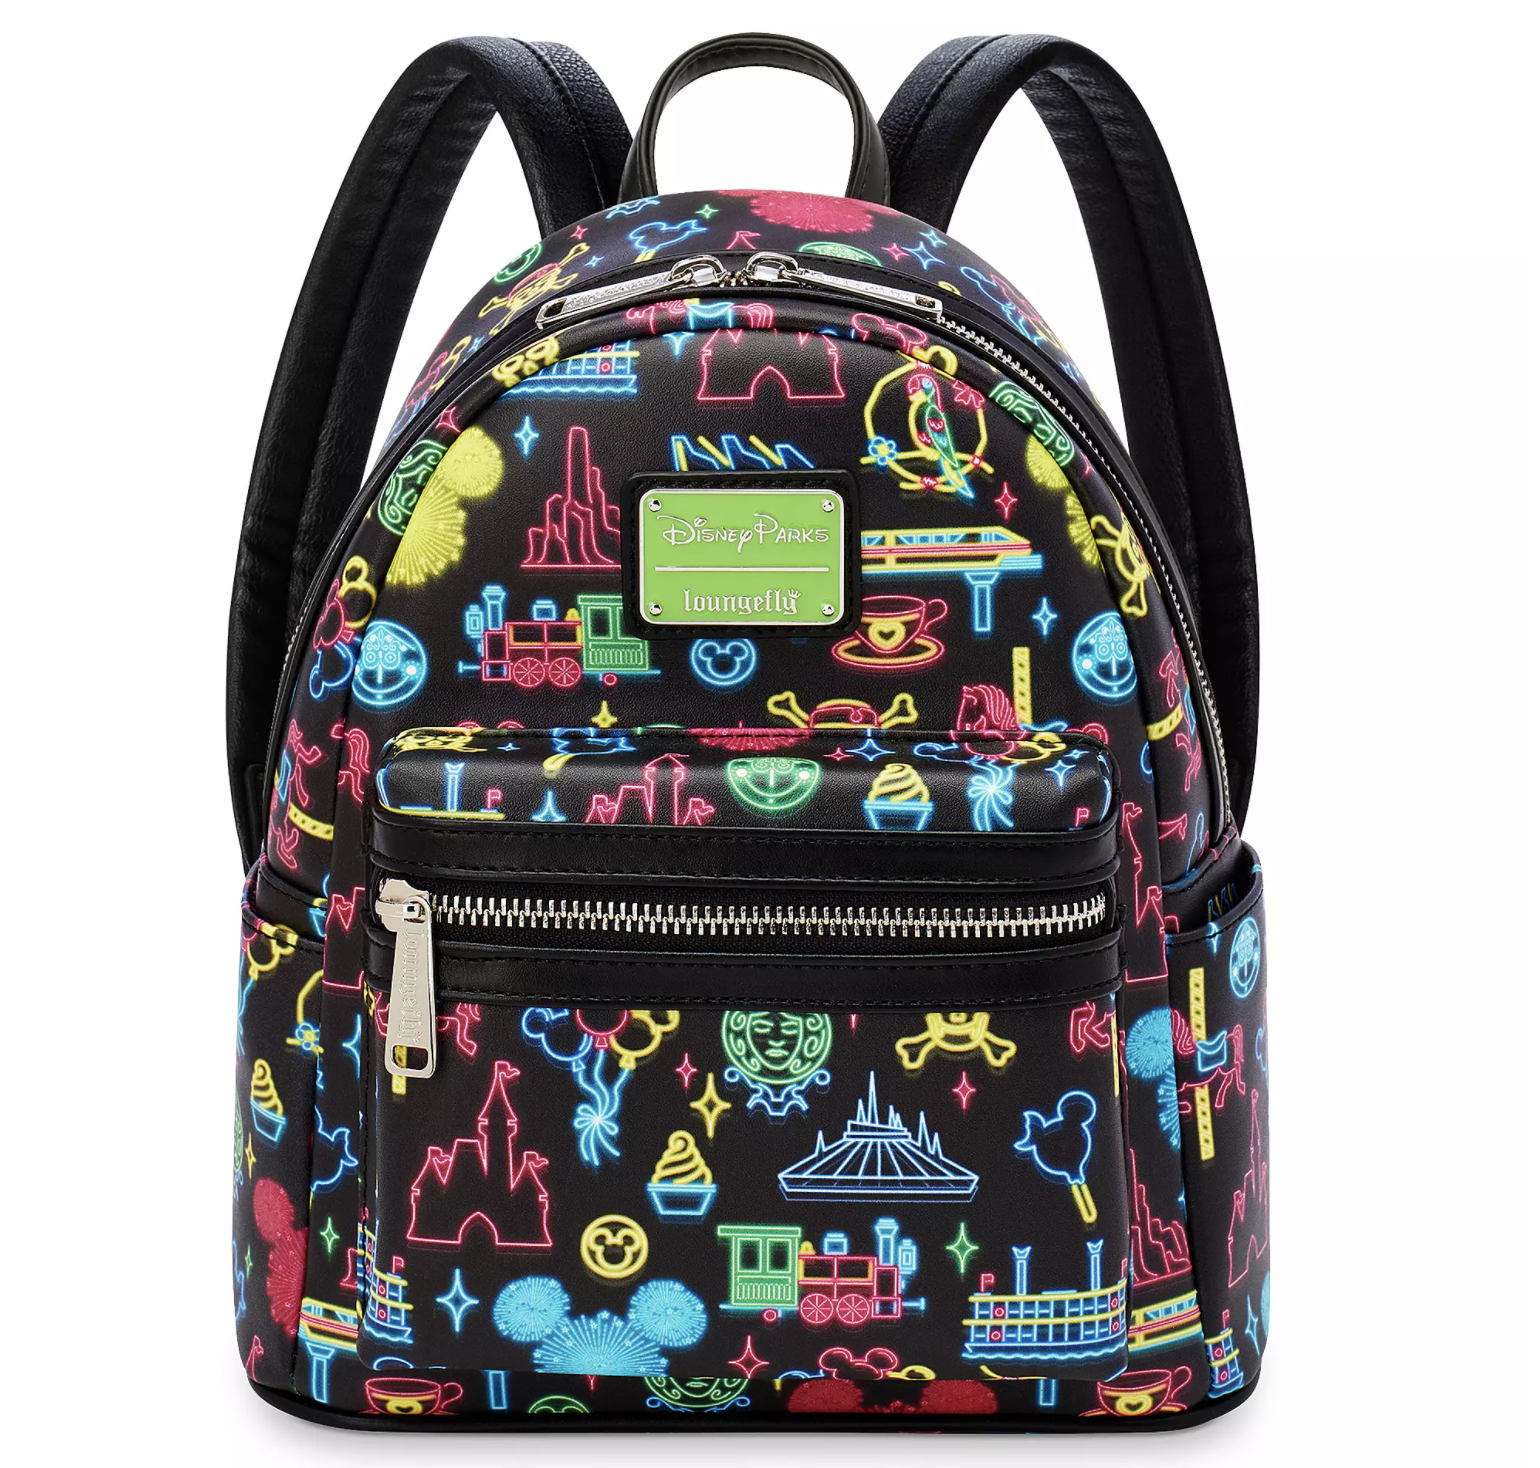 NEW Disney Park Icons and 'Coco' Loungefly Bags Now Available! - AllEars.Net